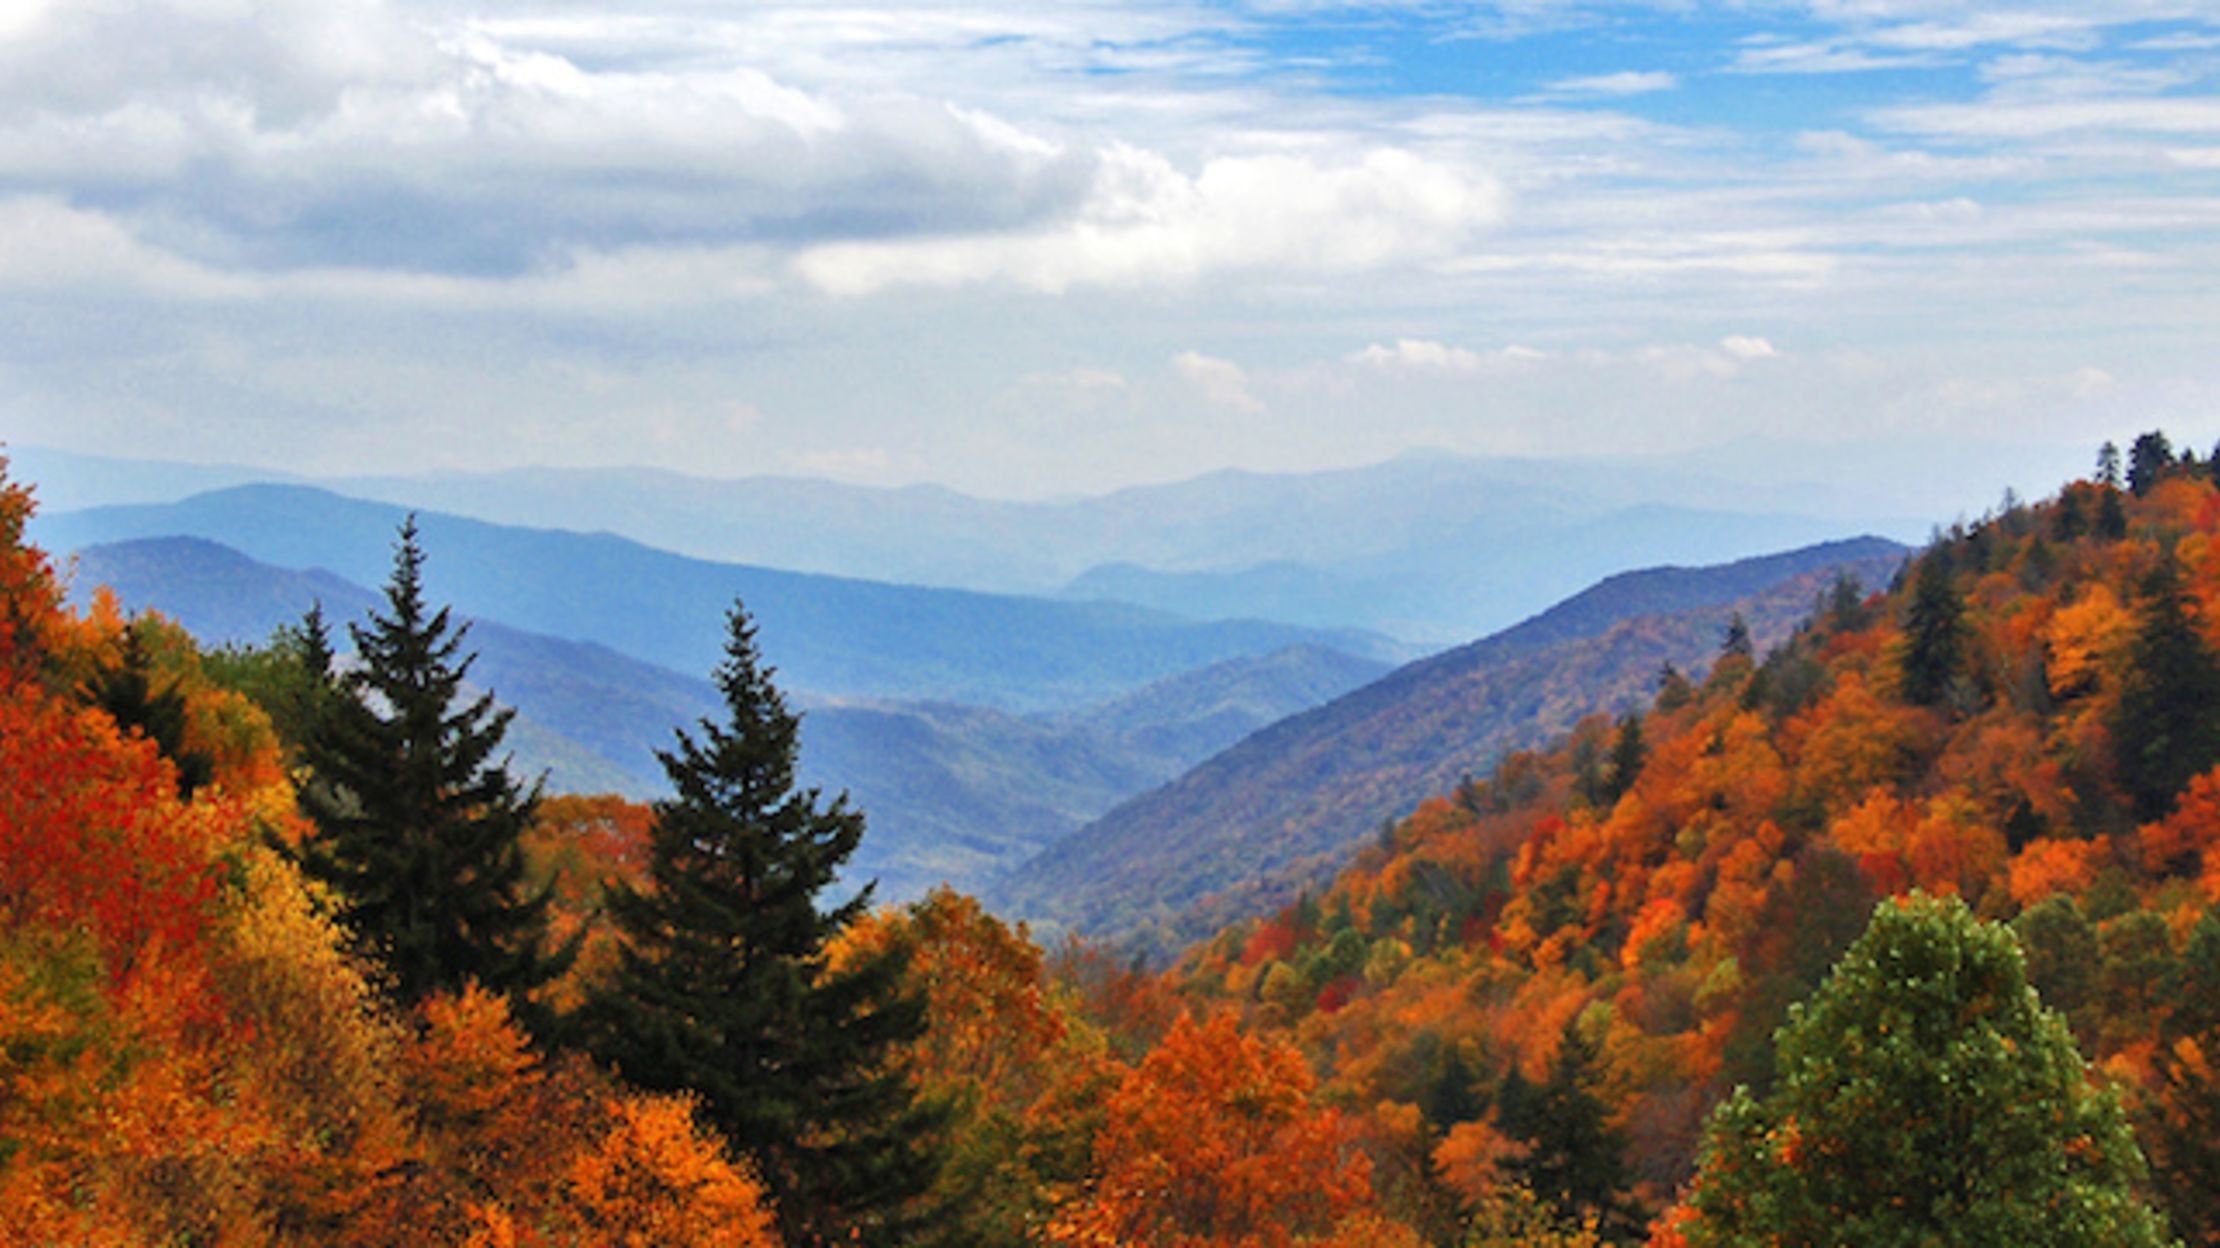 11 Clear Facts About Great Smoky Mountains National Park | Mental Floss